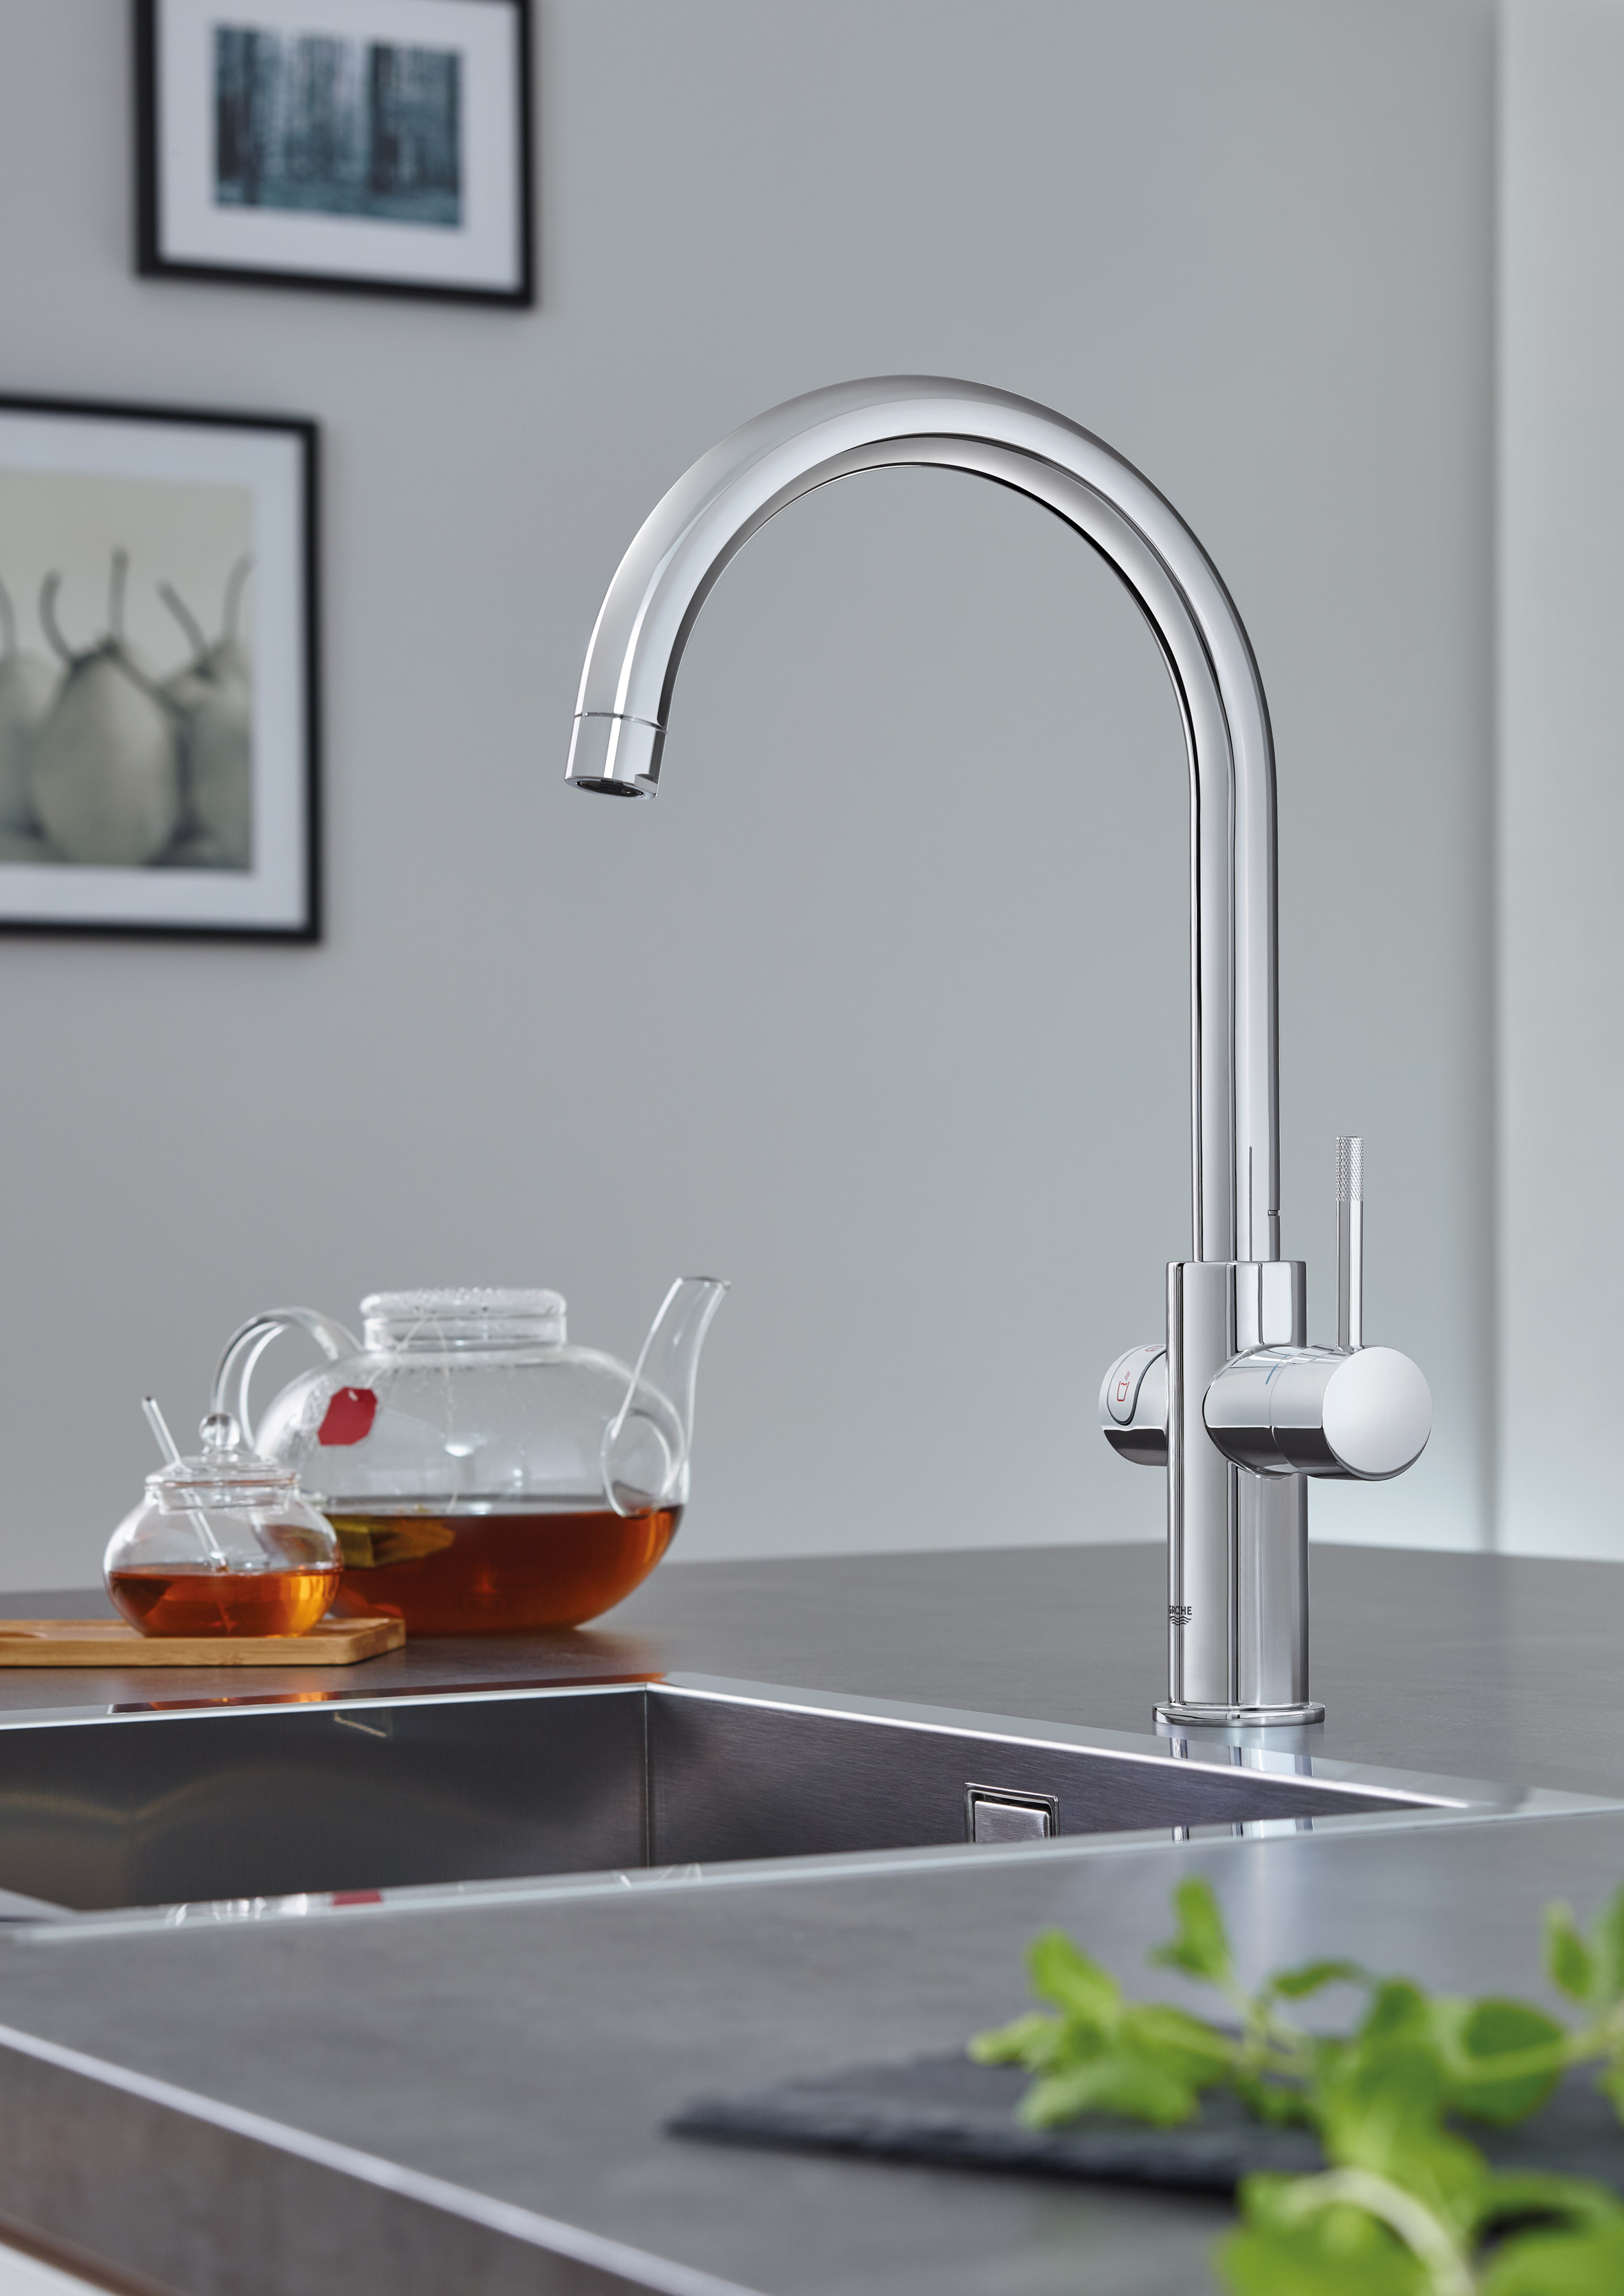 Grohe's Blue Home and Red taps provide instant boiling or sparkling water